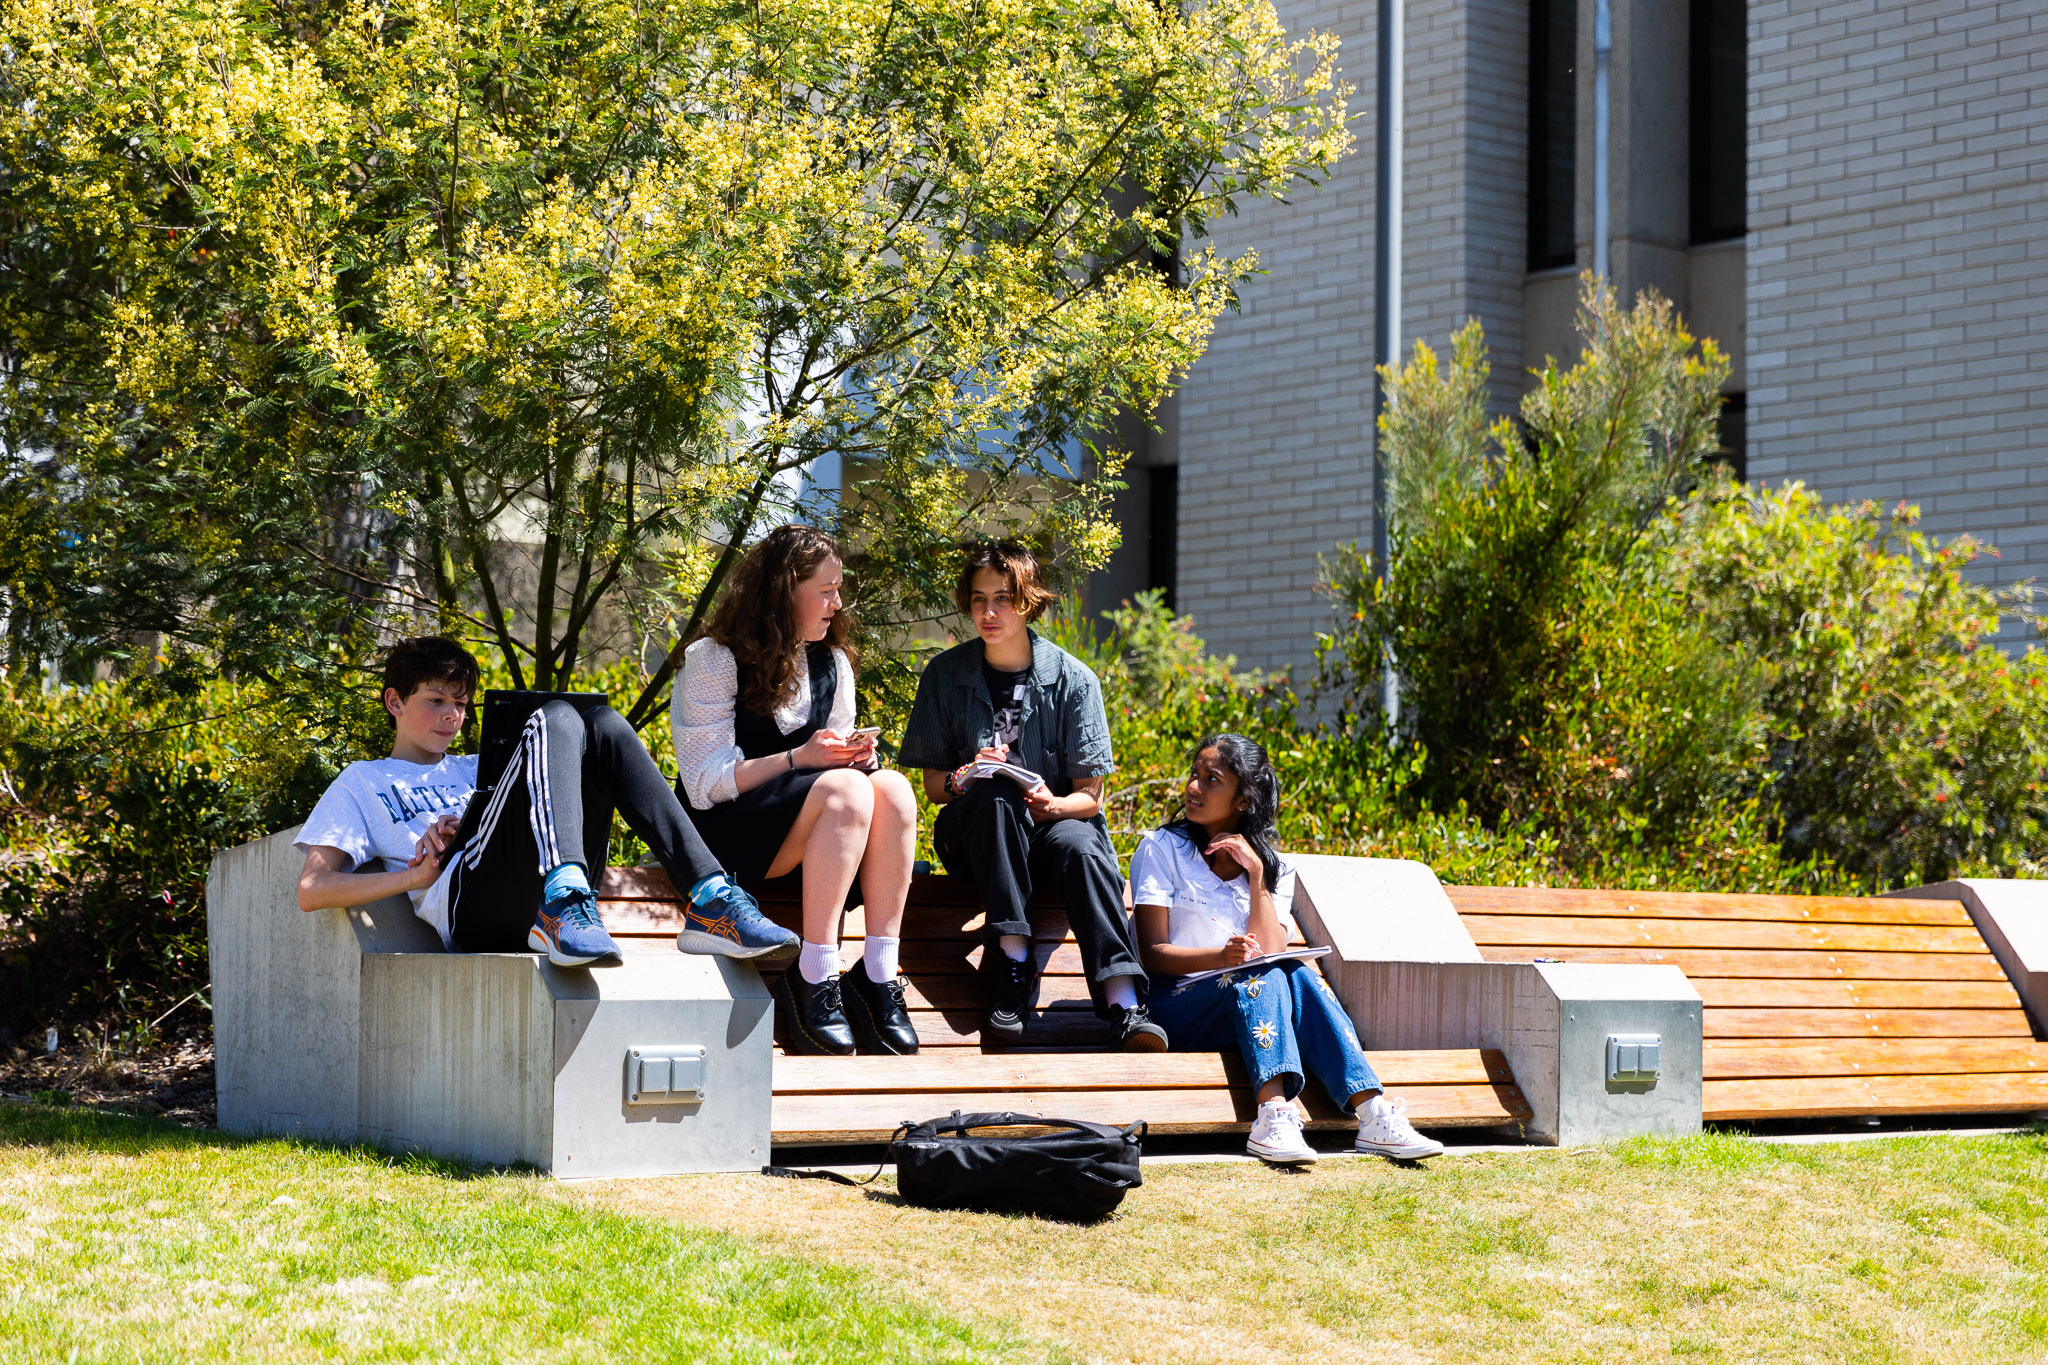 Students using laptops in an outdoor setting